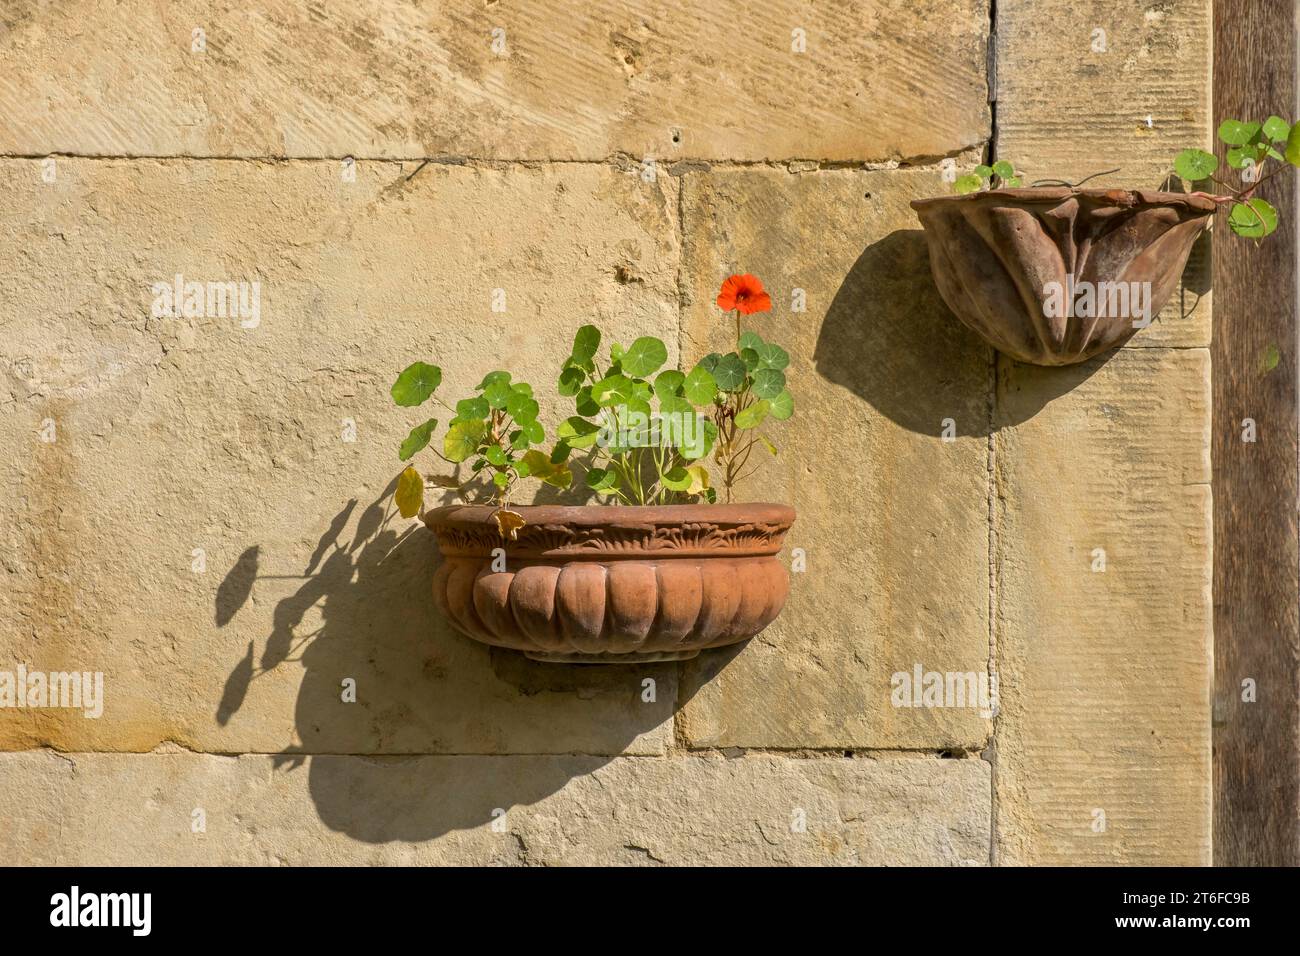 Flower decoration in terracotta pots on an old sandstone wall, North Rhine-Westphalia, Germany Stock Photo